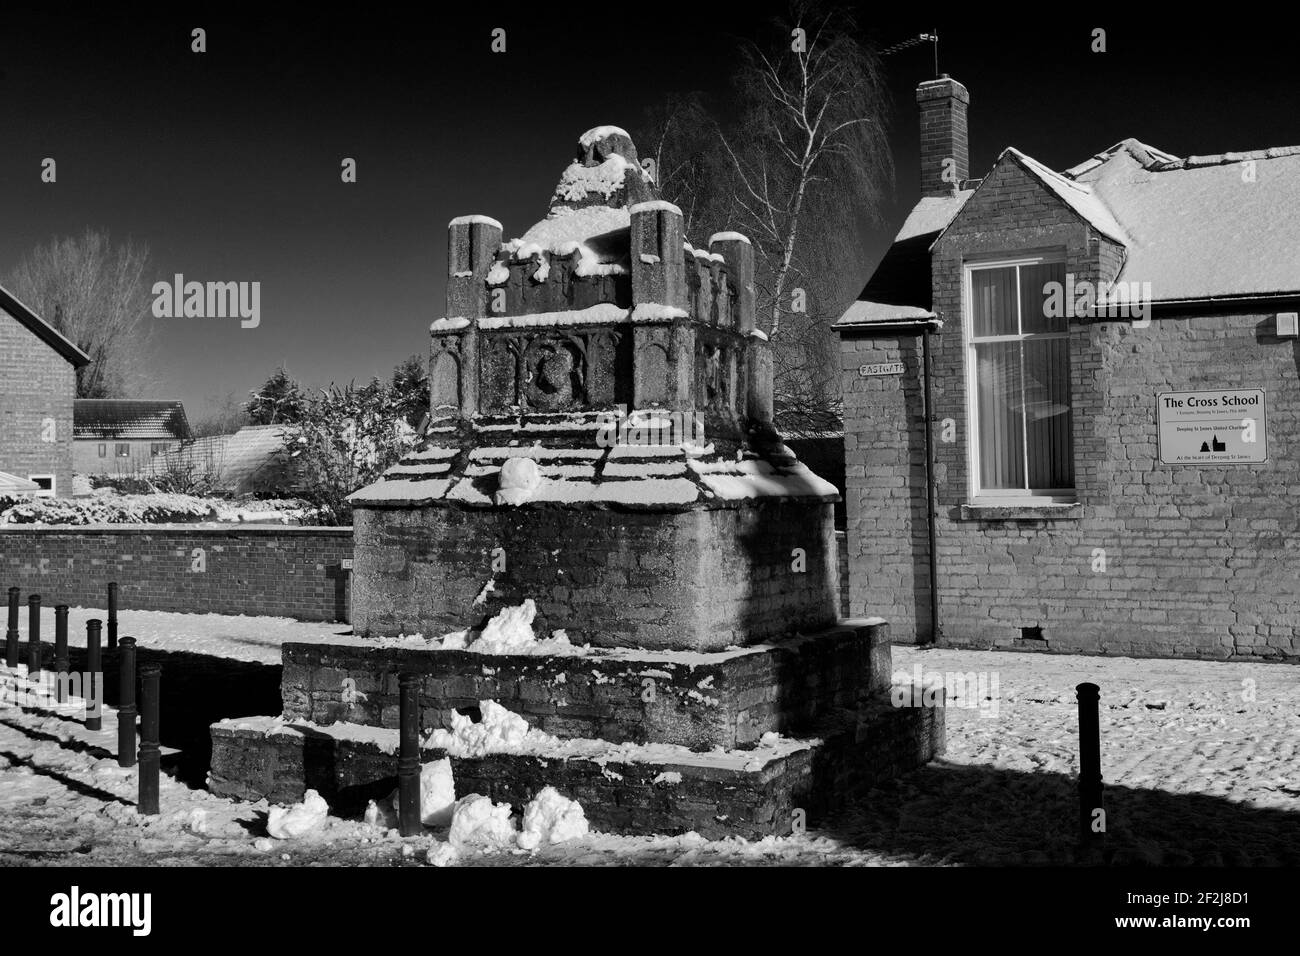 Winter snow, the Old Village Lockup, Deeping St James town, Lincolnshire, England, UK Stock Photo